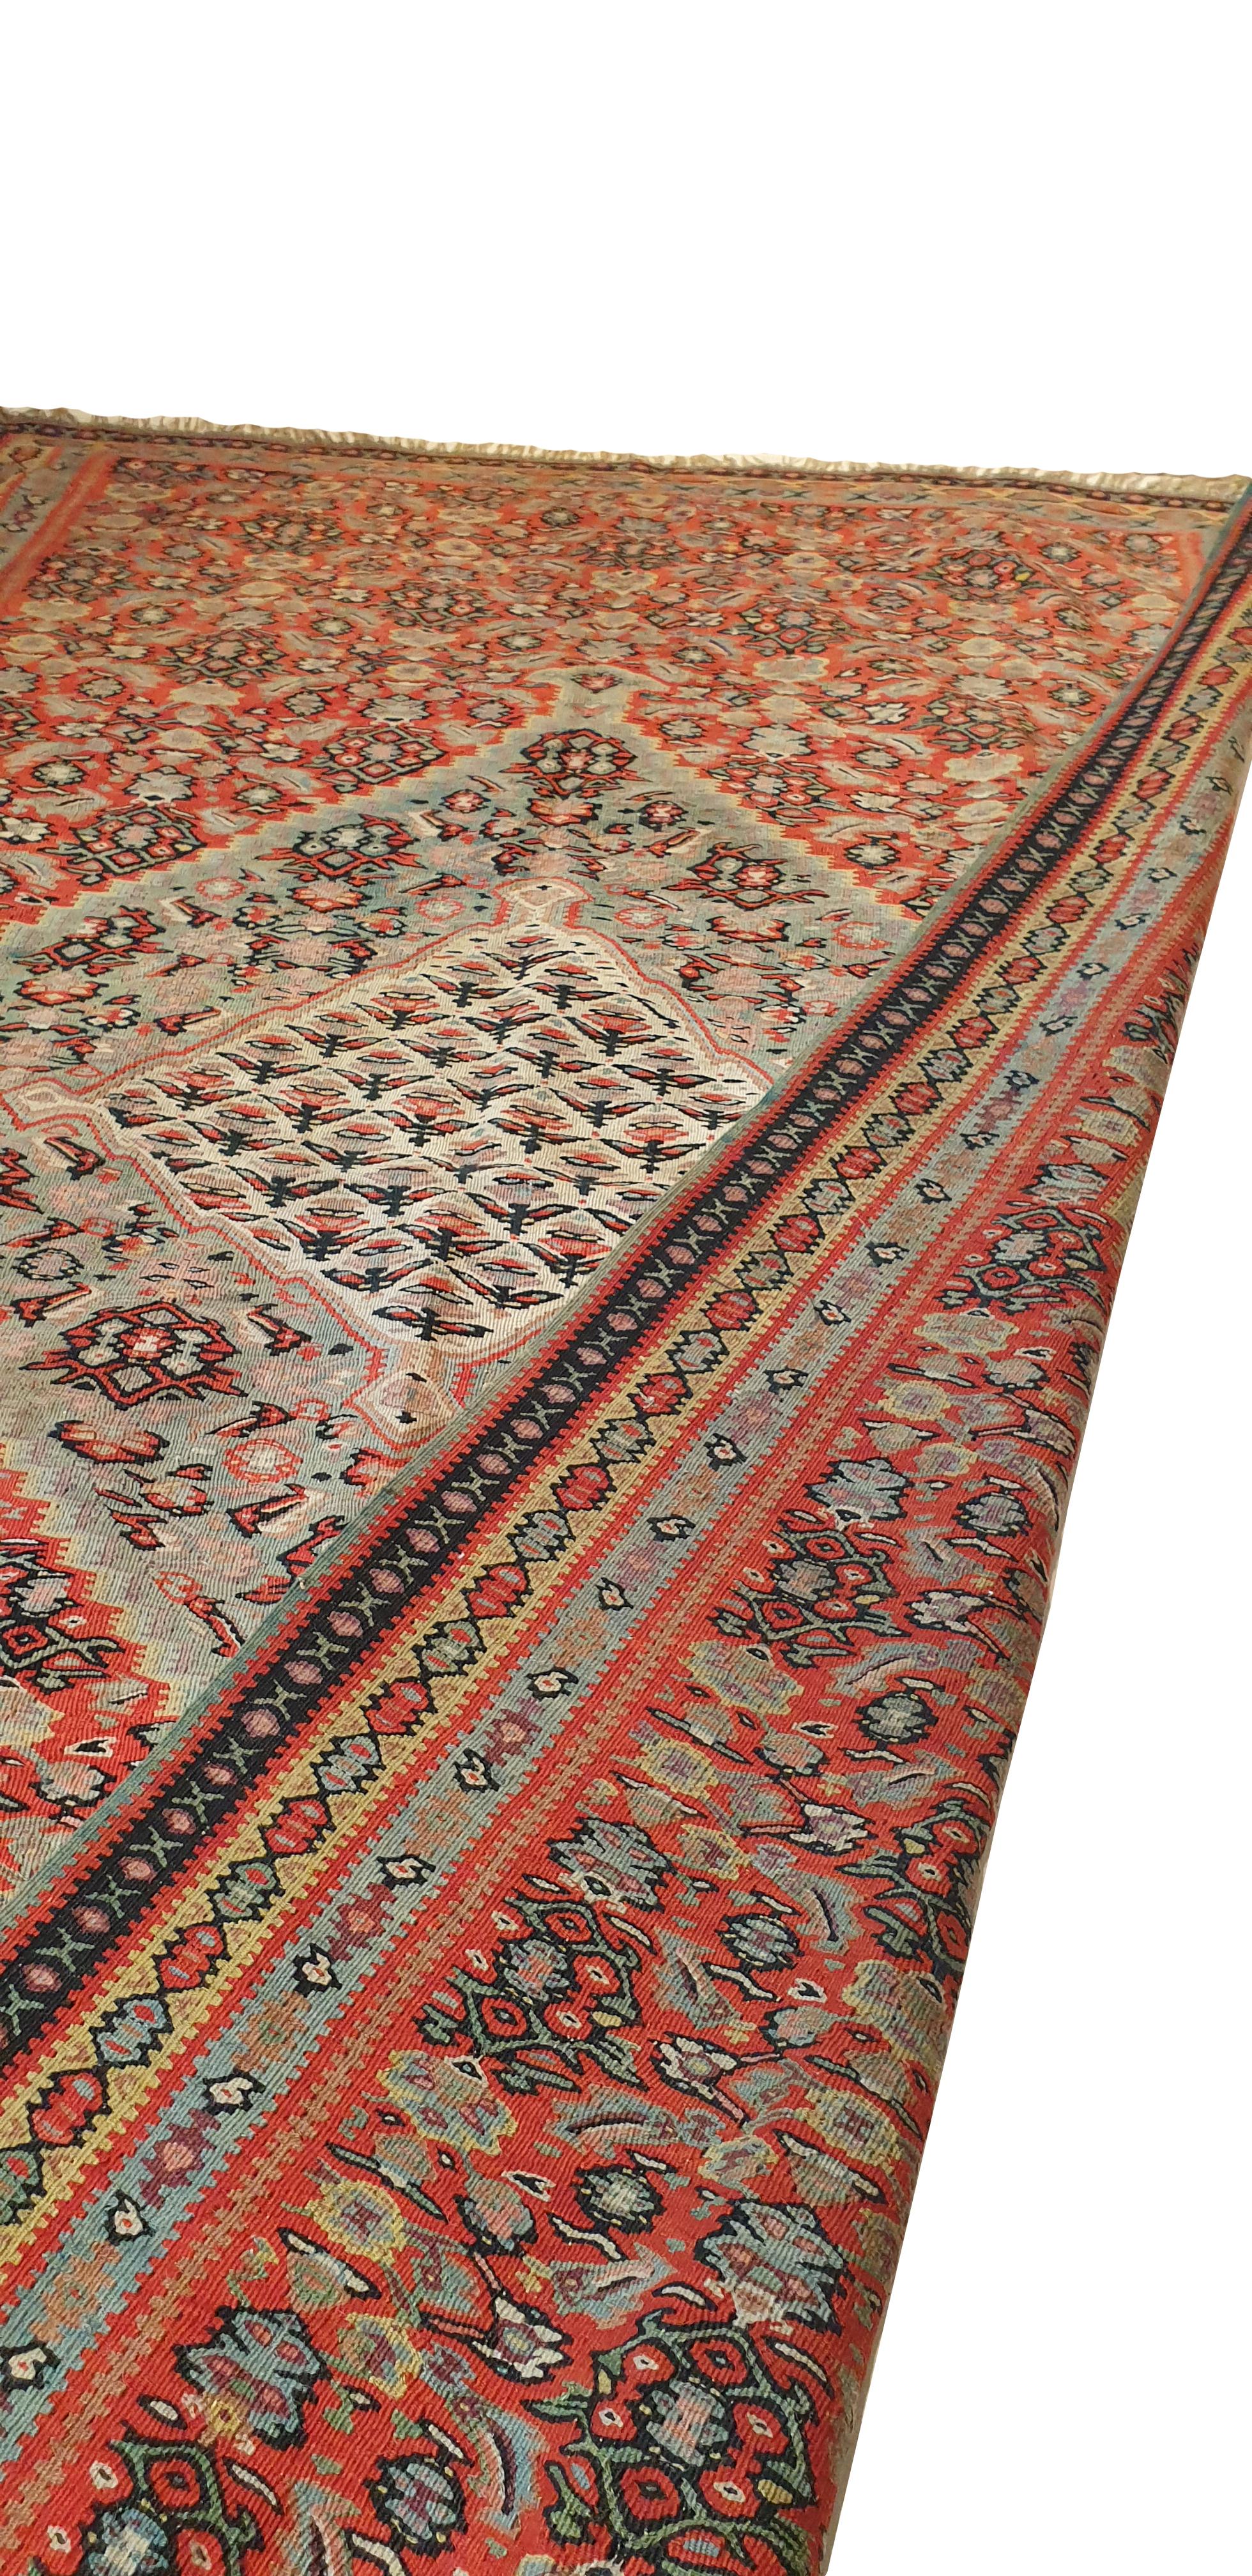 Wool 661 - 19th Century Senneh Kilim with Beautiful Patterns For Sale